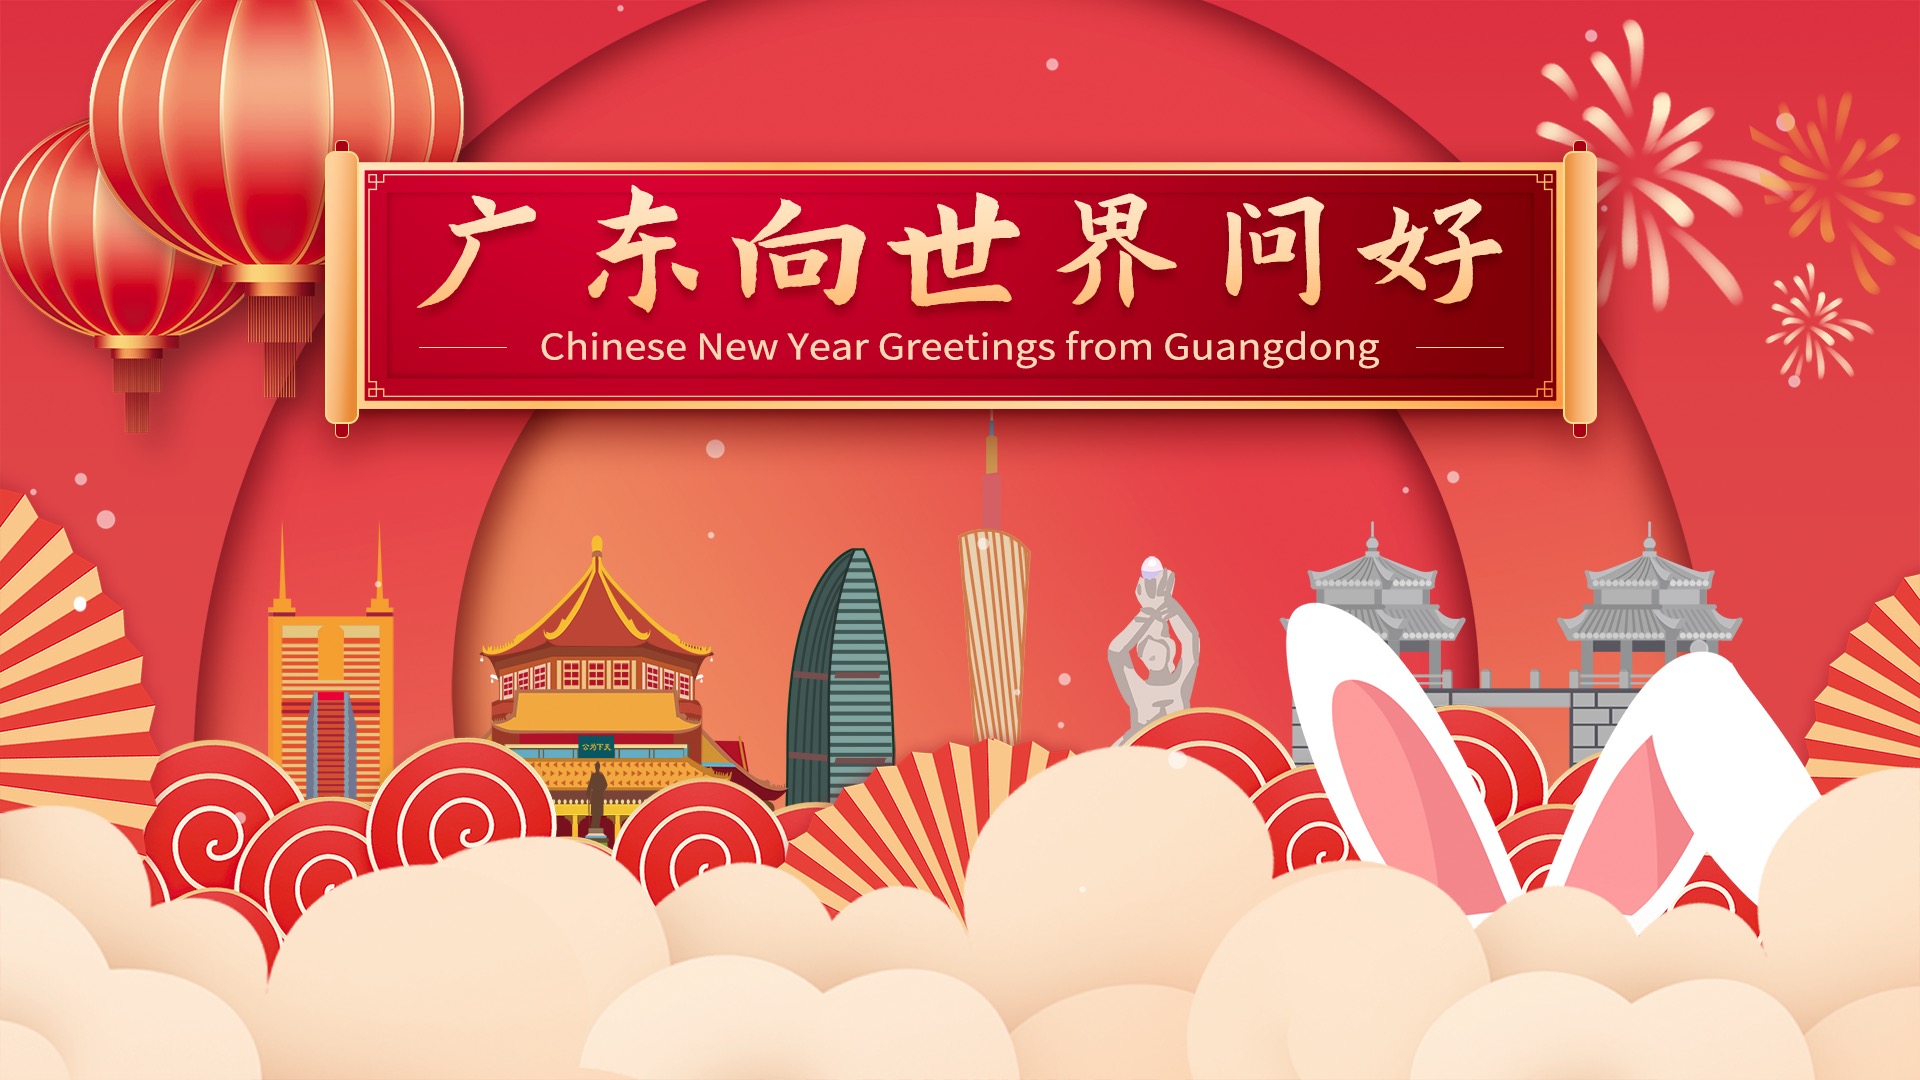 @All You have New Year's greetings from Guangdong 您收到了一条来自广东的祝福